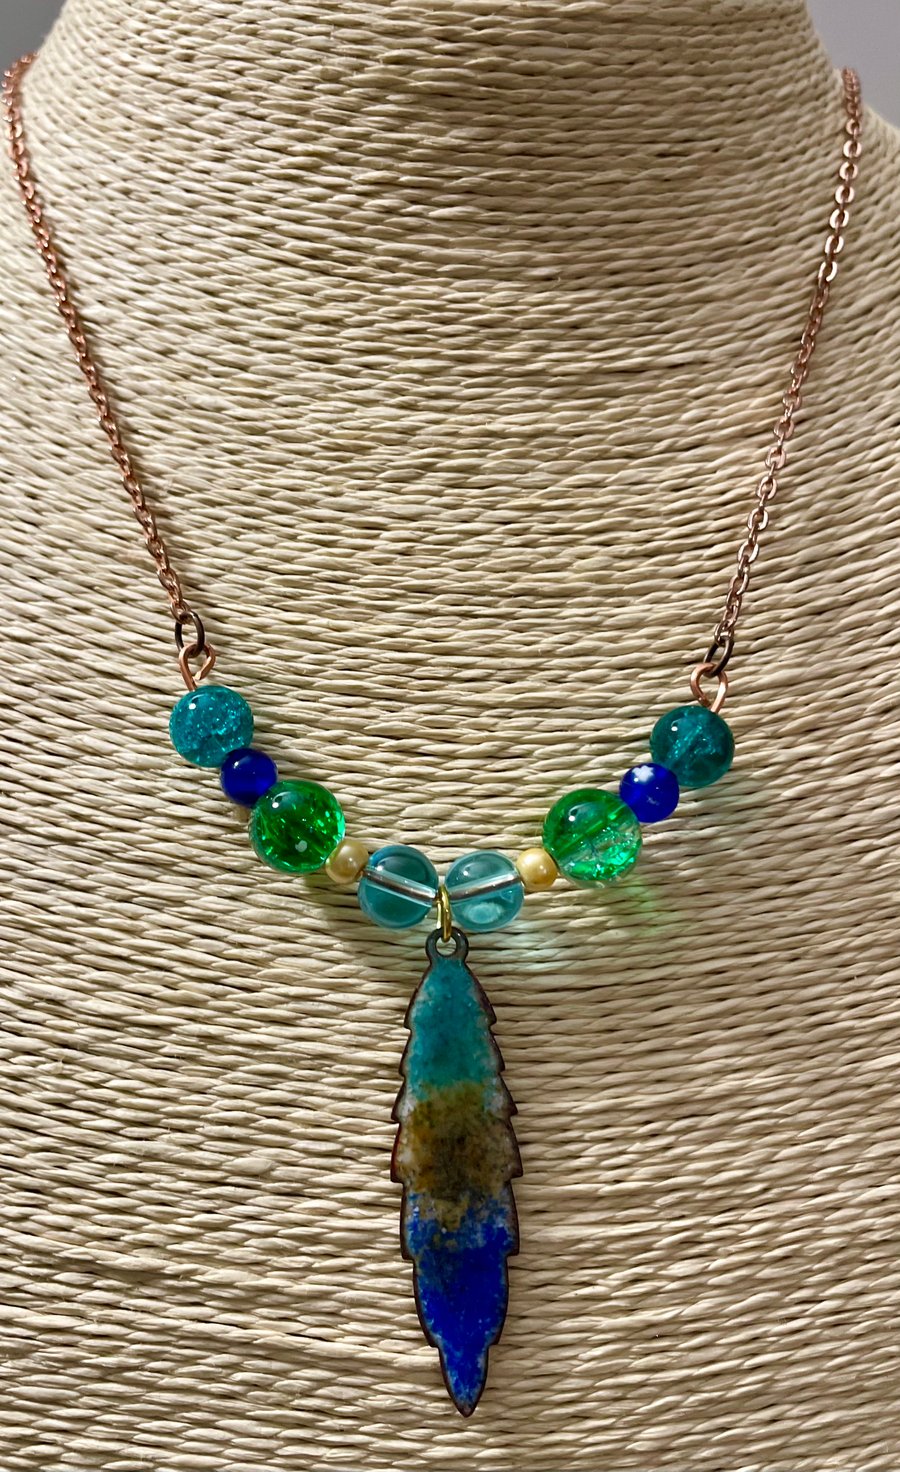 Vitreous enamel Copper leaf Necklace with Cracked Bead Detail (Sea-green) 